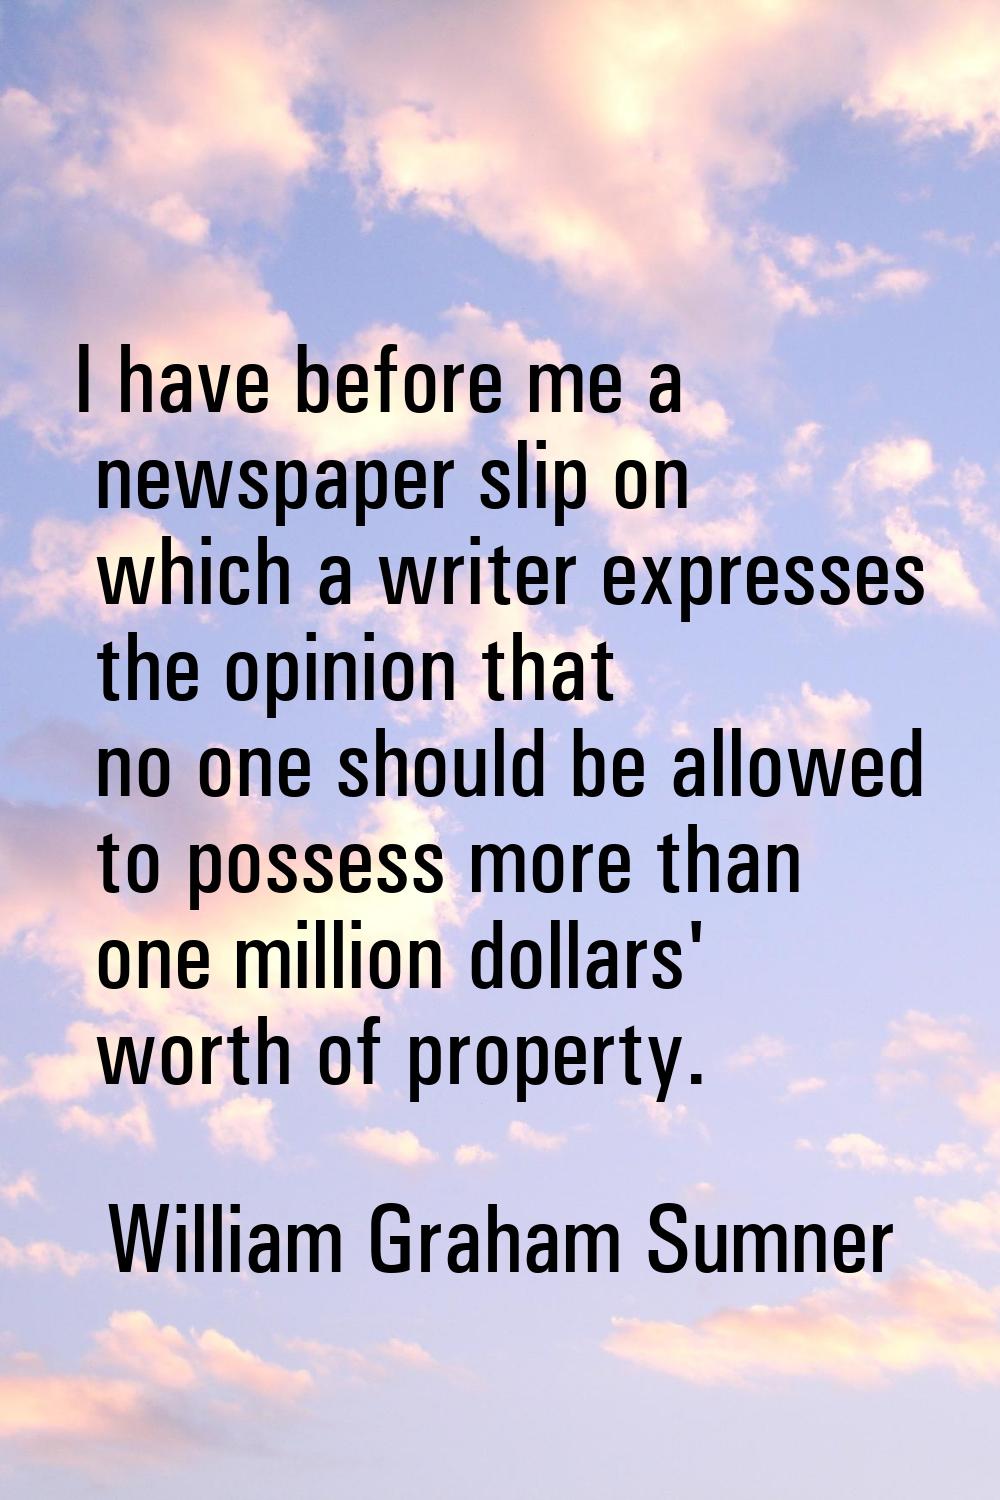 I have before me a newspaper slip on which a writer expresses the opinion that no one should be all